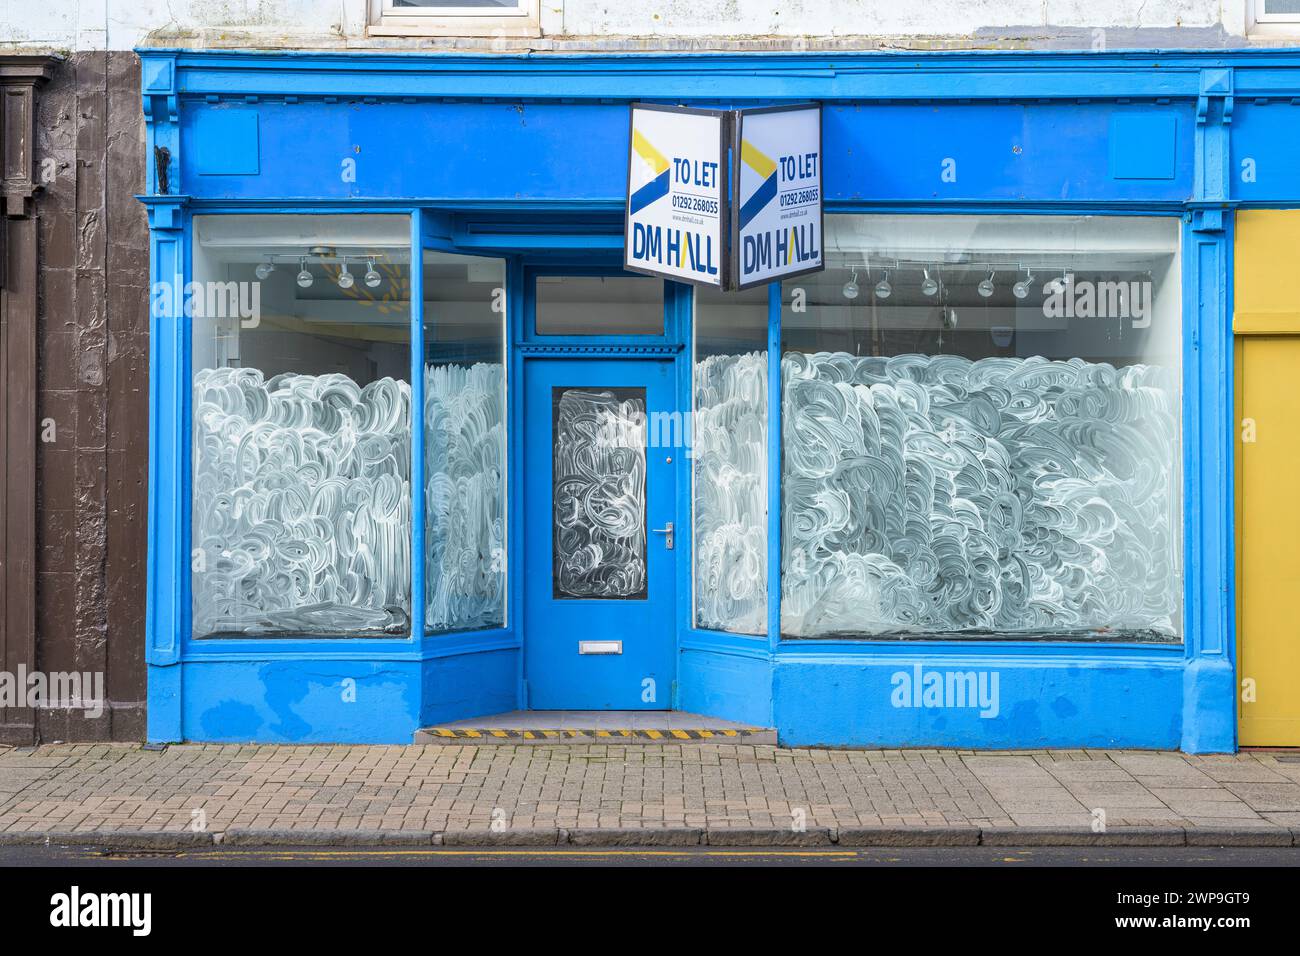 To Let sign on a permanently closed shop, Troon, Ayrshire, Scotland, UK, Europe Stock Photo